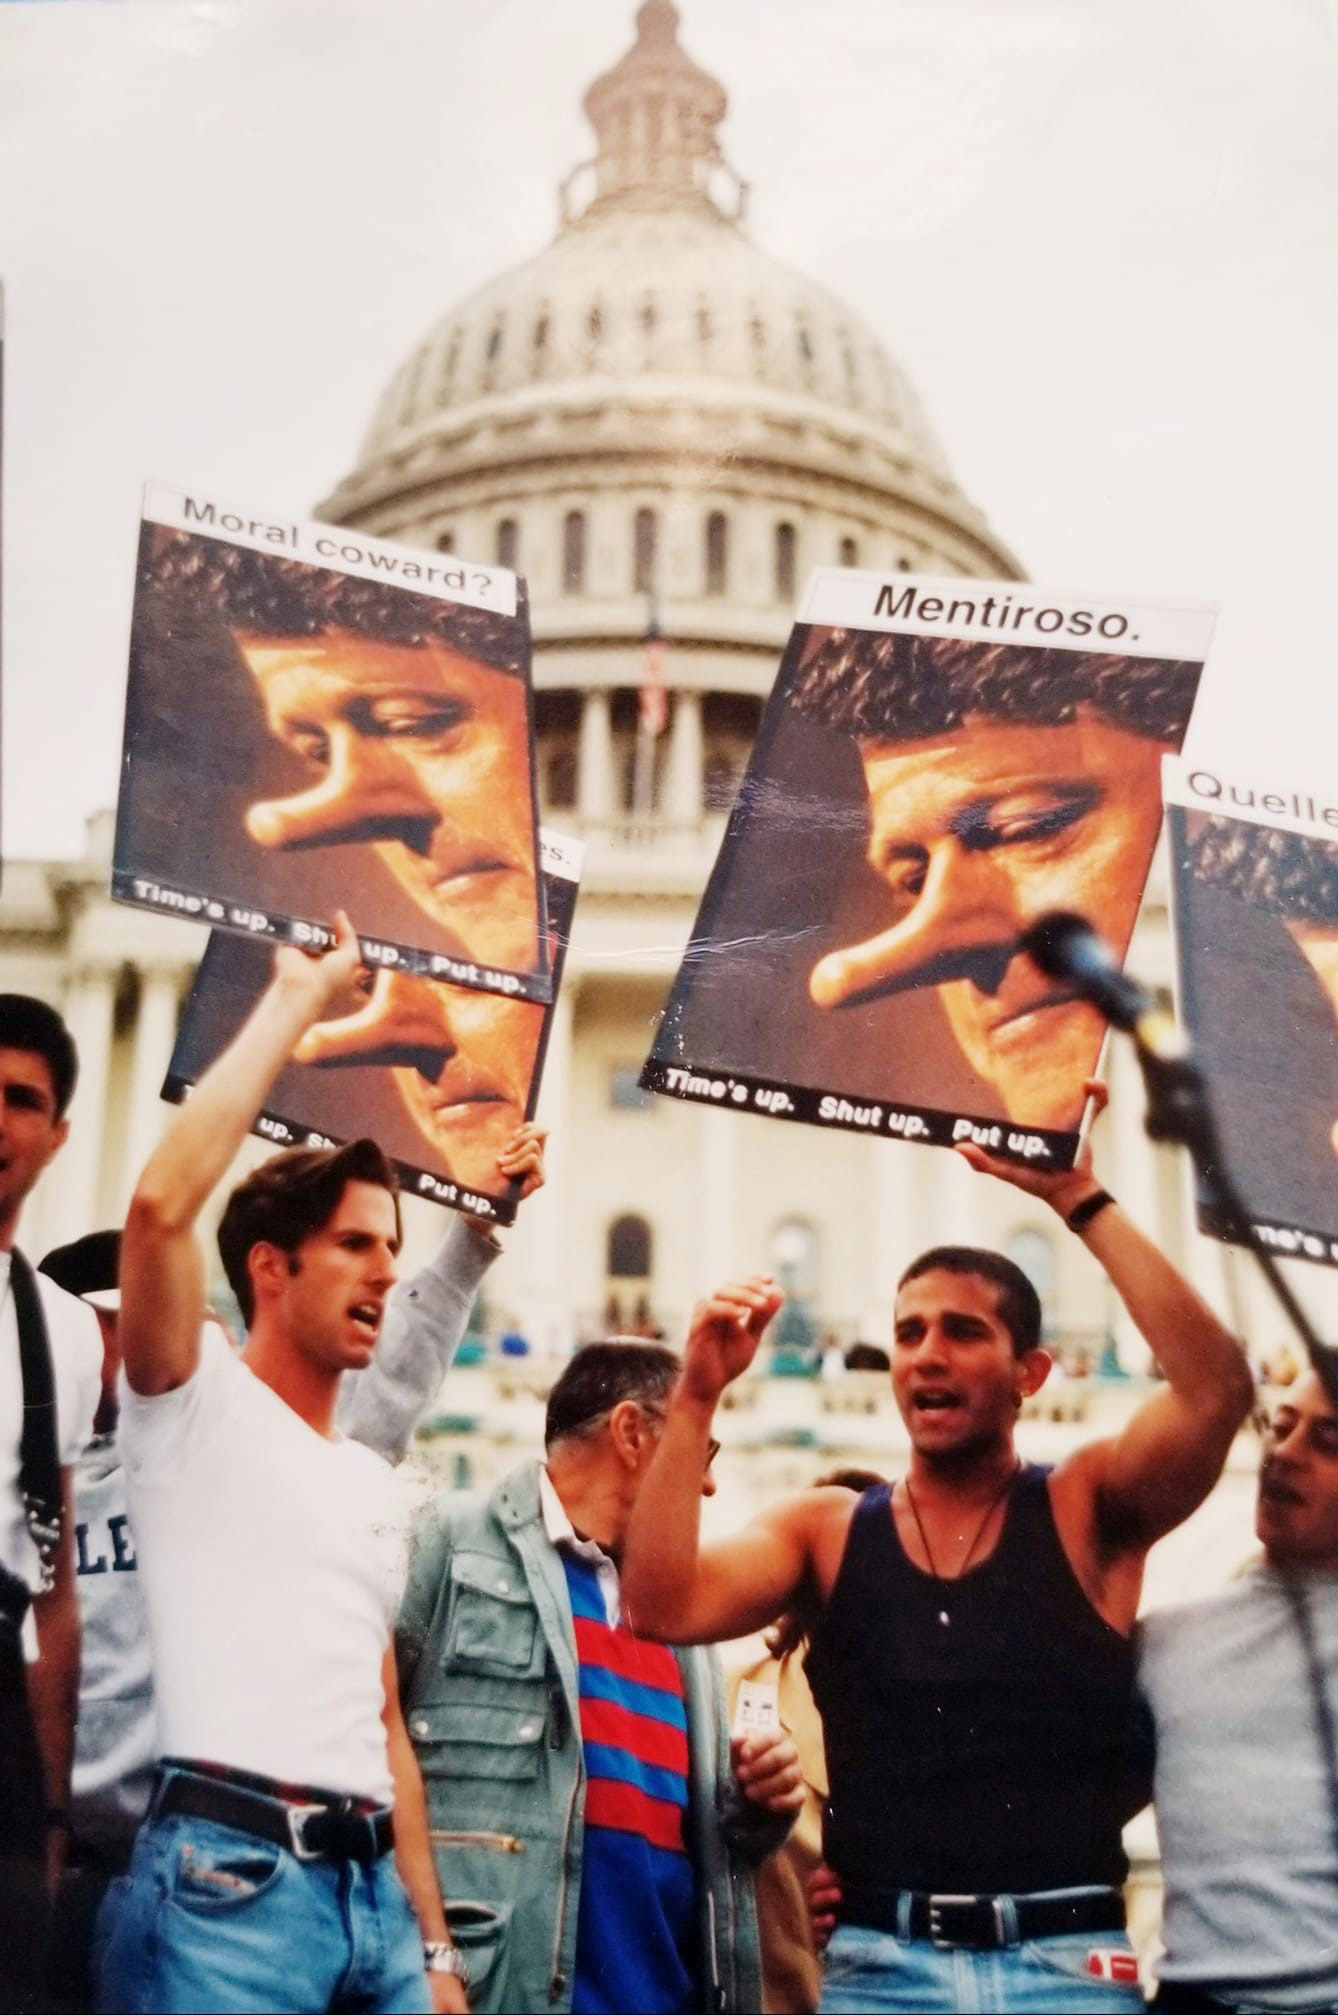 Moises Agosto, Larry Kramer and members of Act Up protesting outside the Washington Capitol during the 1993 National March. Photographer: Jose Gutierrez